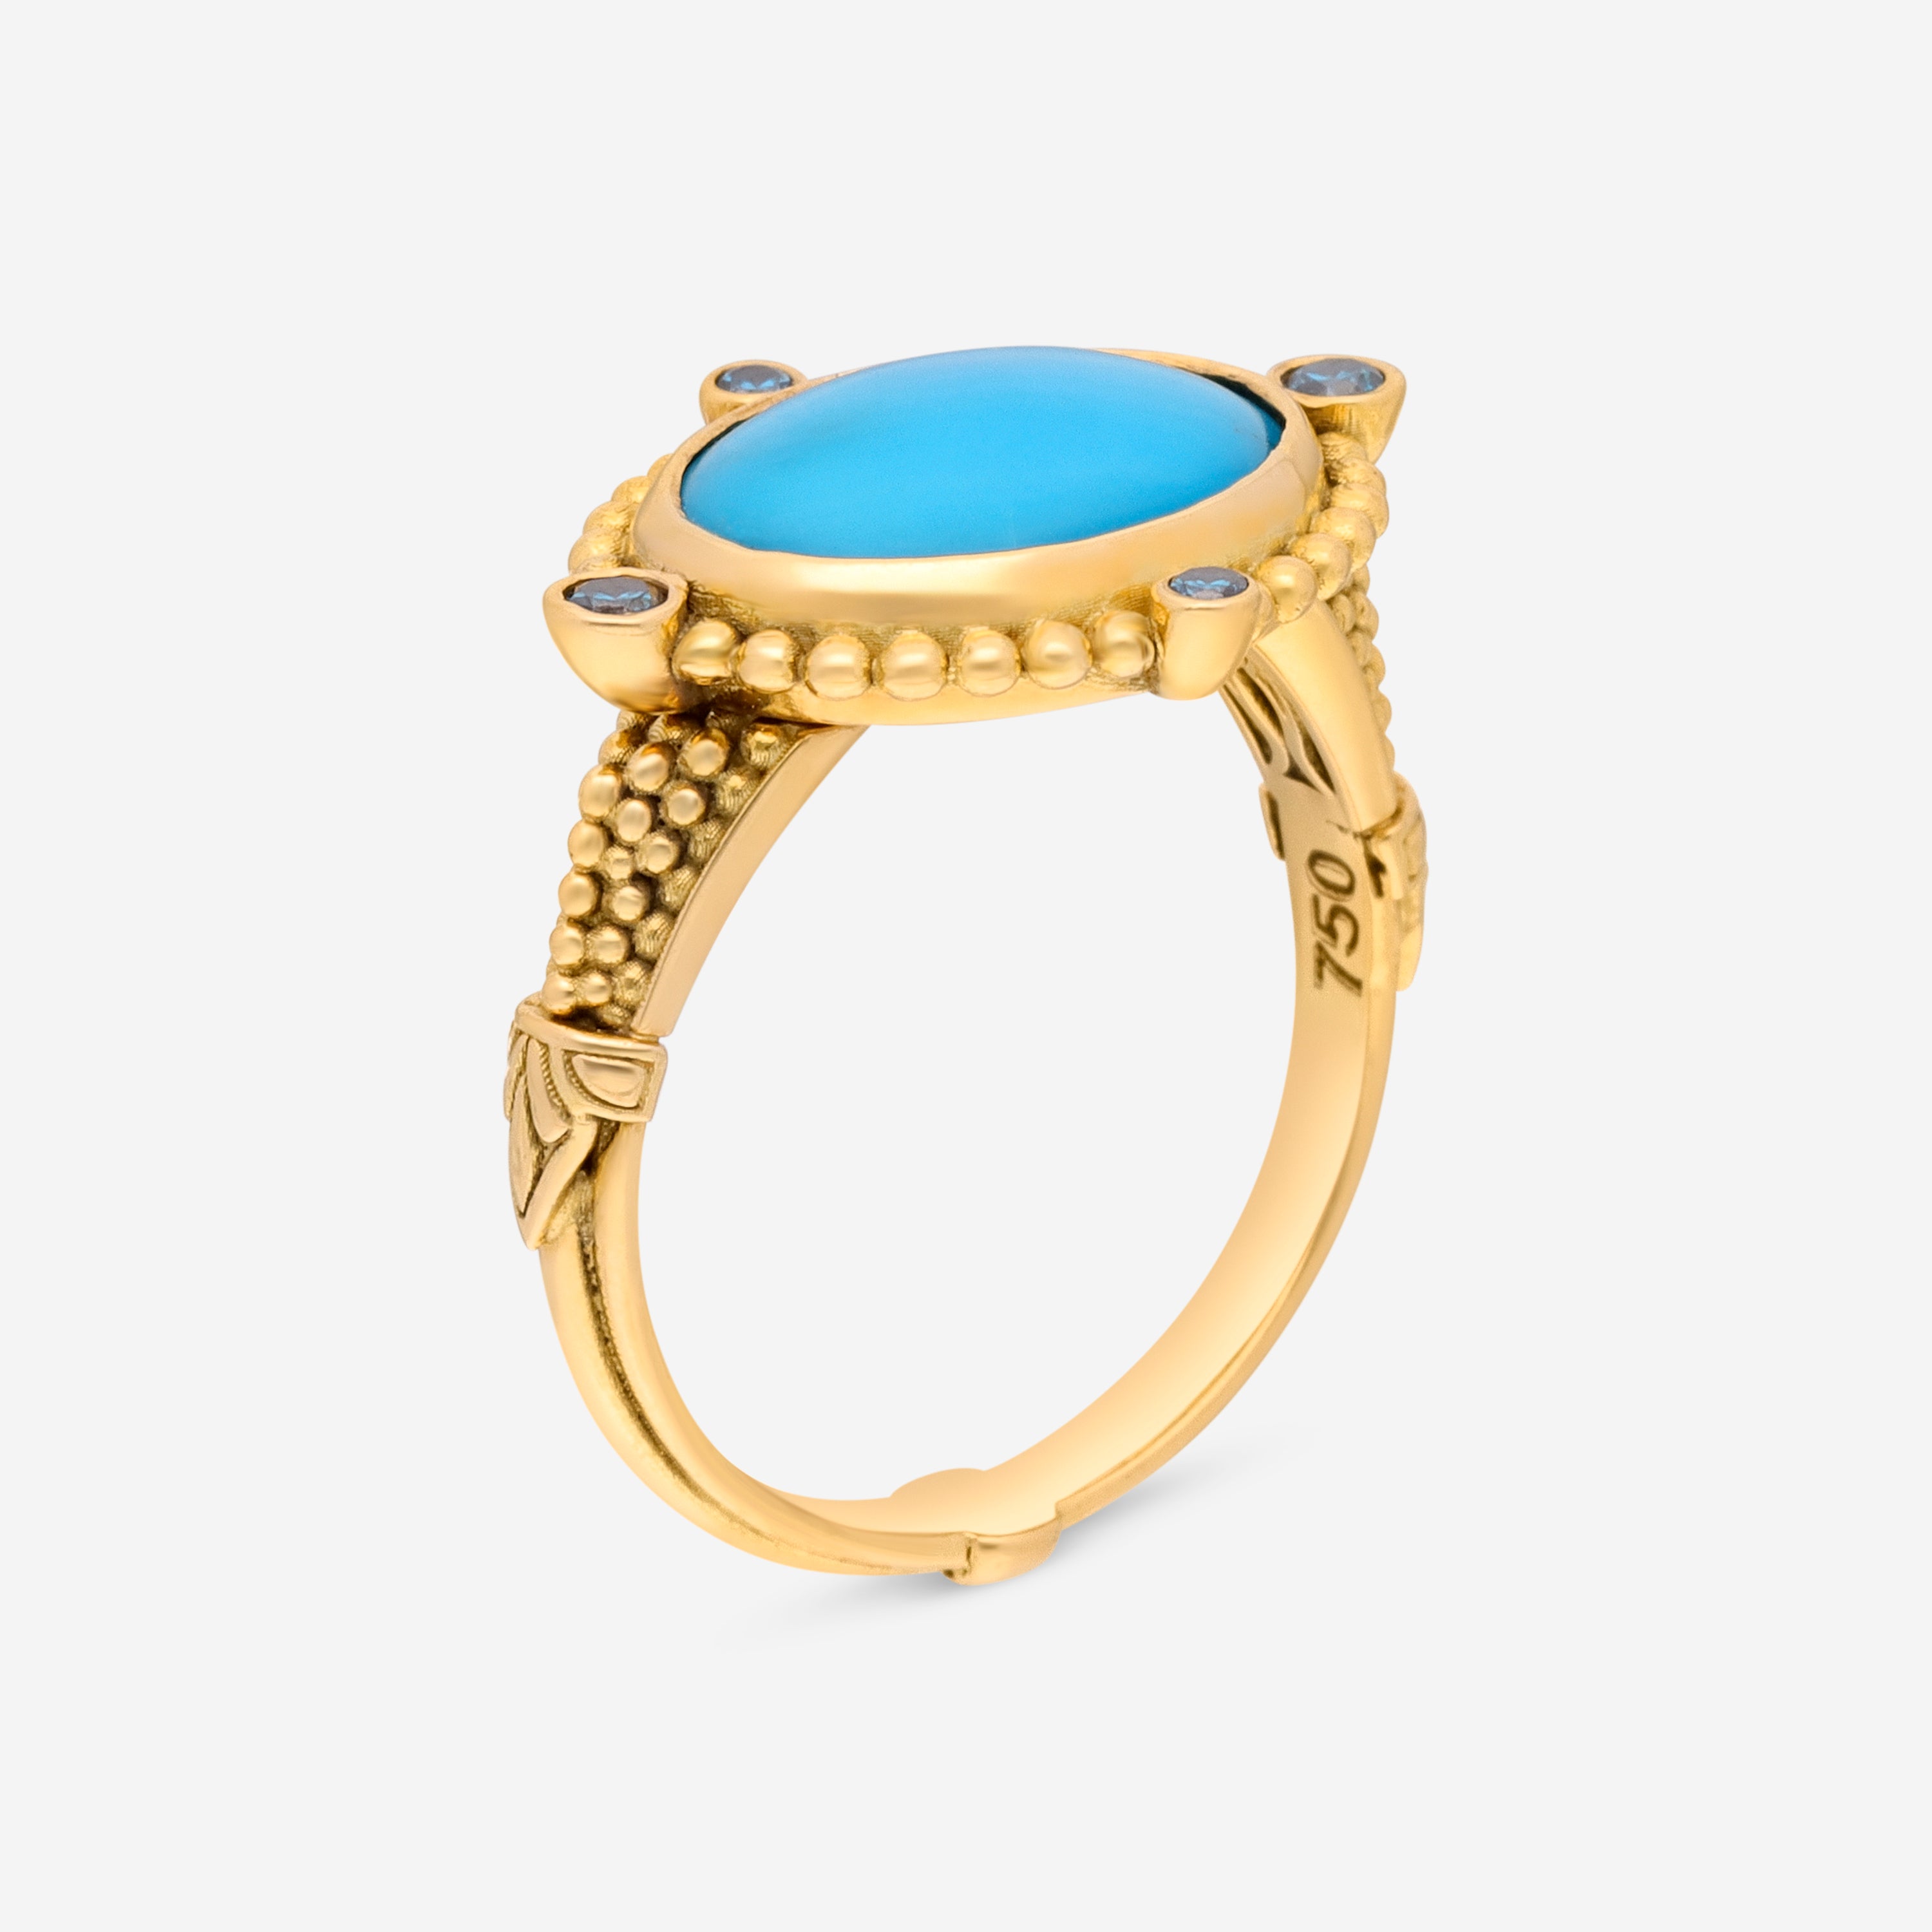 Konstantino Limited 18K Yellow Gold, Turquoise, and Blue Diamond Ring DMK01122-18KT-470